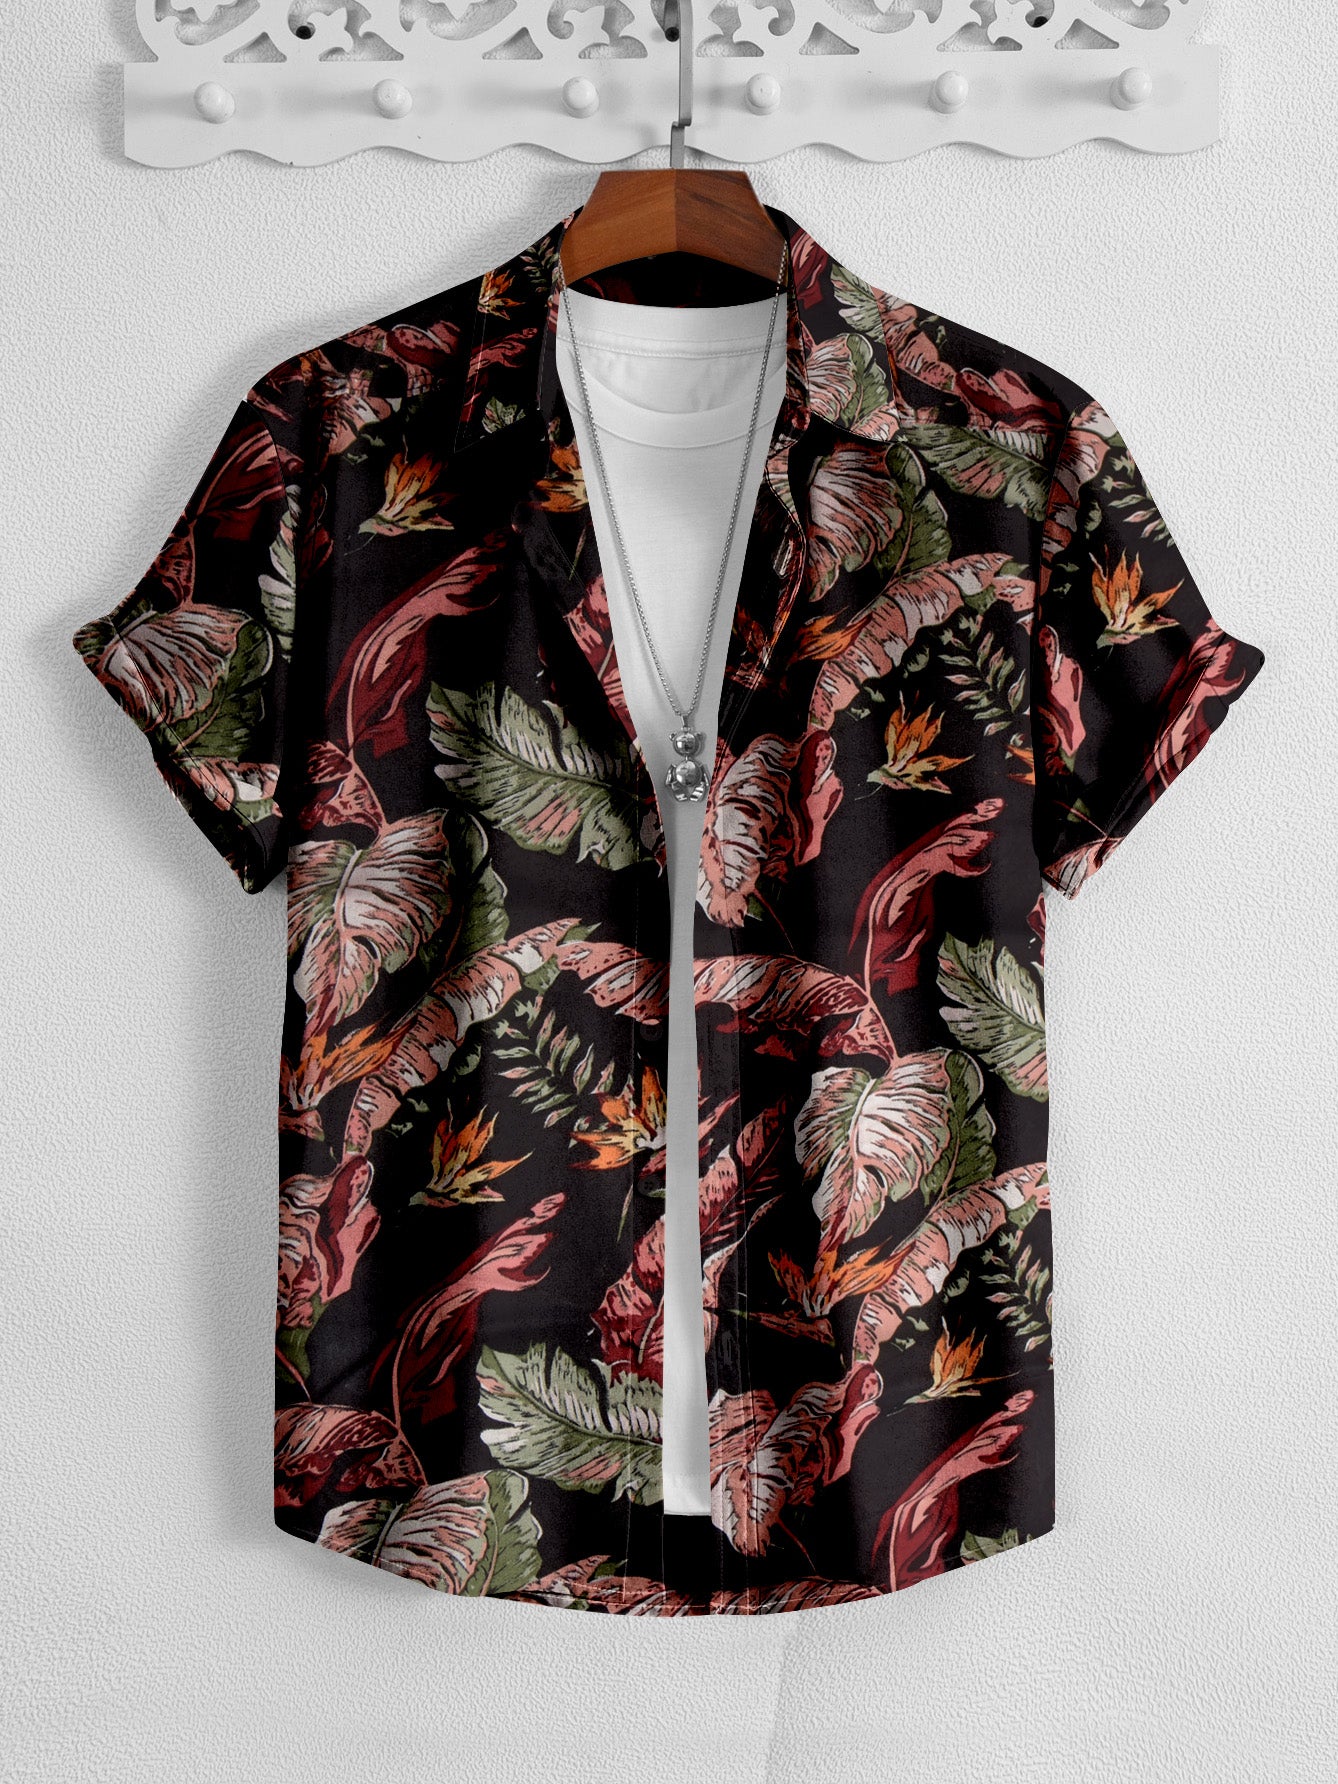 OXEN Premium Half Sleeve Slim Fit Casual Shirt For Men-Black with Allover Floral Print-SP2145